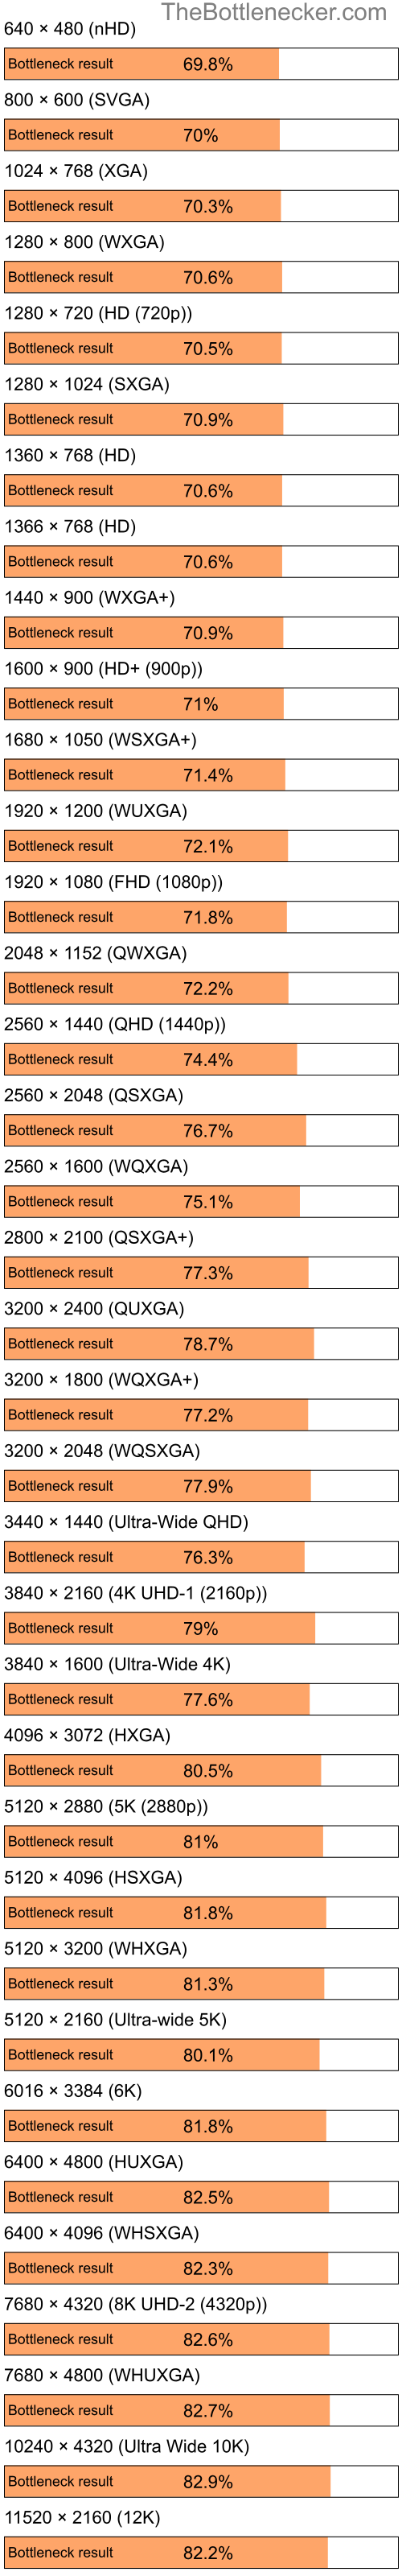 Bottleneck results by resolution for Intel Pentium 4 and NVIDIA GeForce 9400M in Graphic Card Intense Tasks